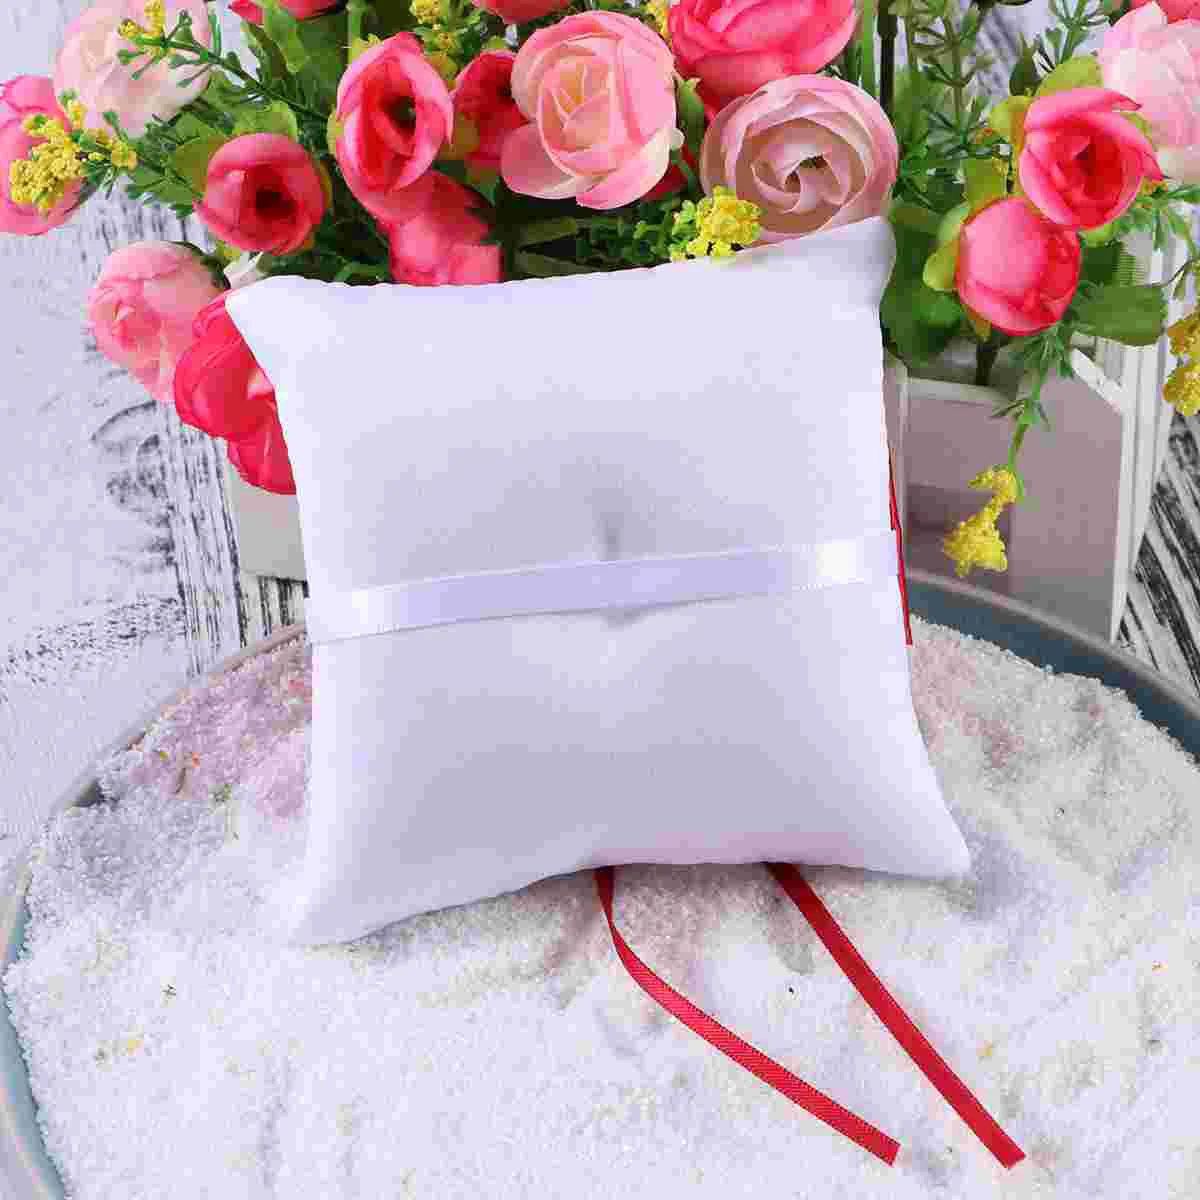 

Ring Pillow Pearls Cushion, Satin Ribbons Ring Pillow with Bow- knot and Pearl Design for Wedding Proposal Celebration Banquet